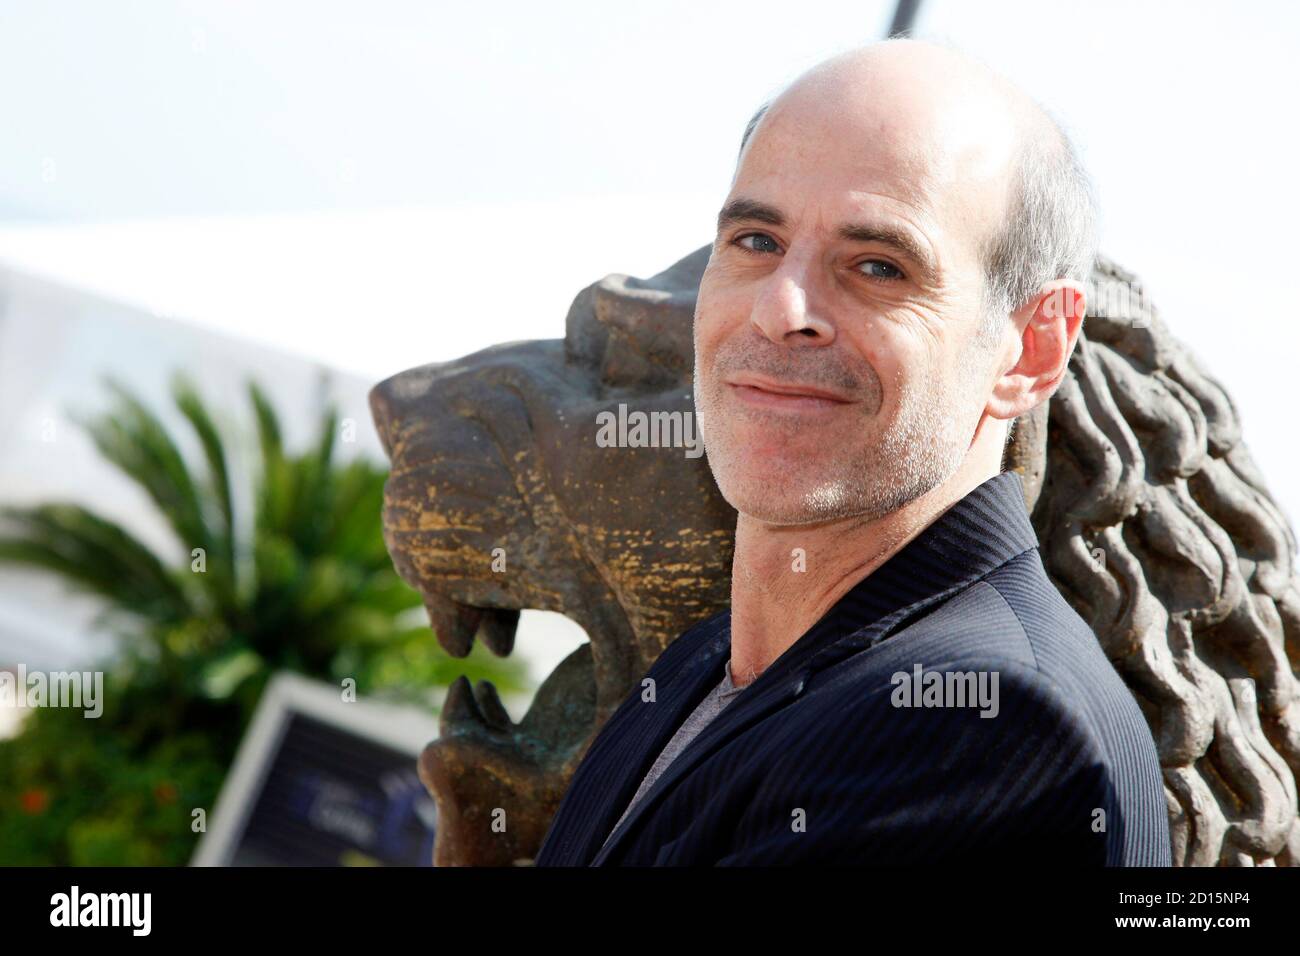 Director Samuel Maoz looks on as he stands next to a copy of Gold Lion award during the 66th Venice Film Festival September 10, 2009.   REUTERS/Alessandro Bianchi   (ITALY ENTERTAINMENT) Stock Photo